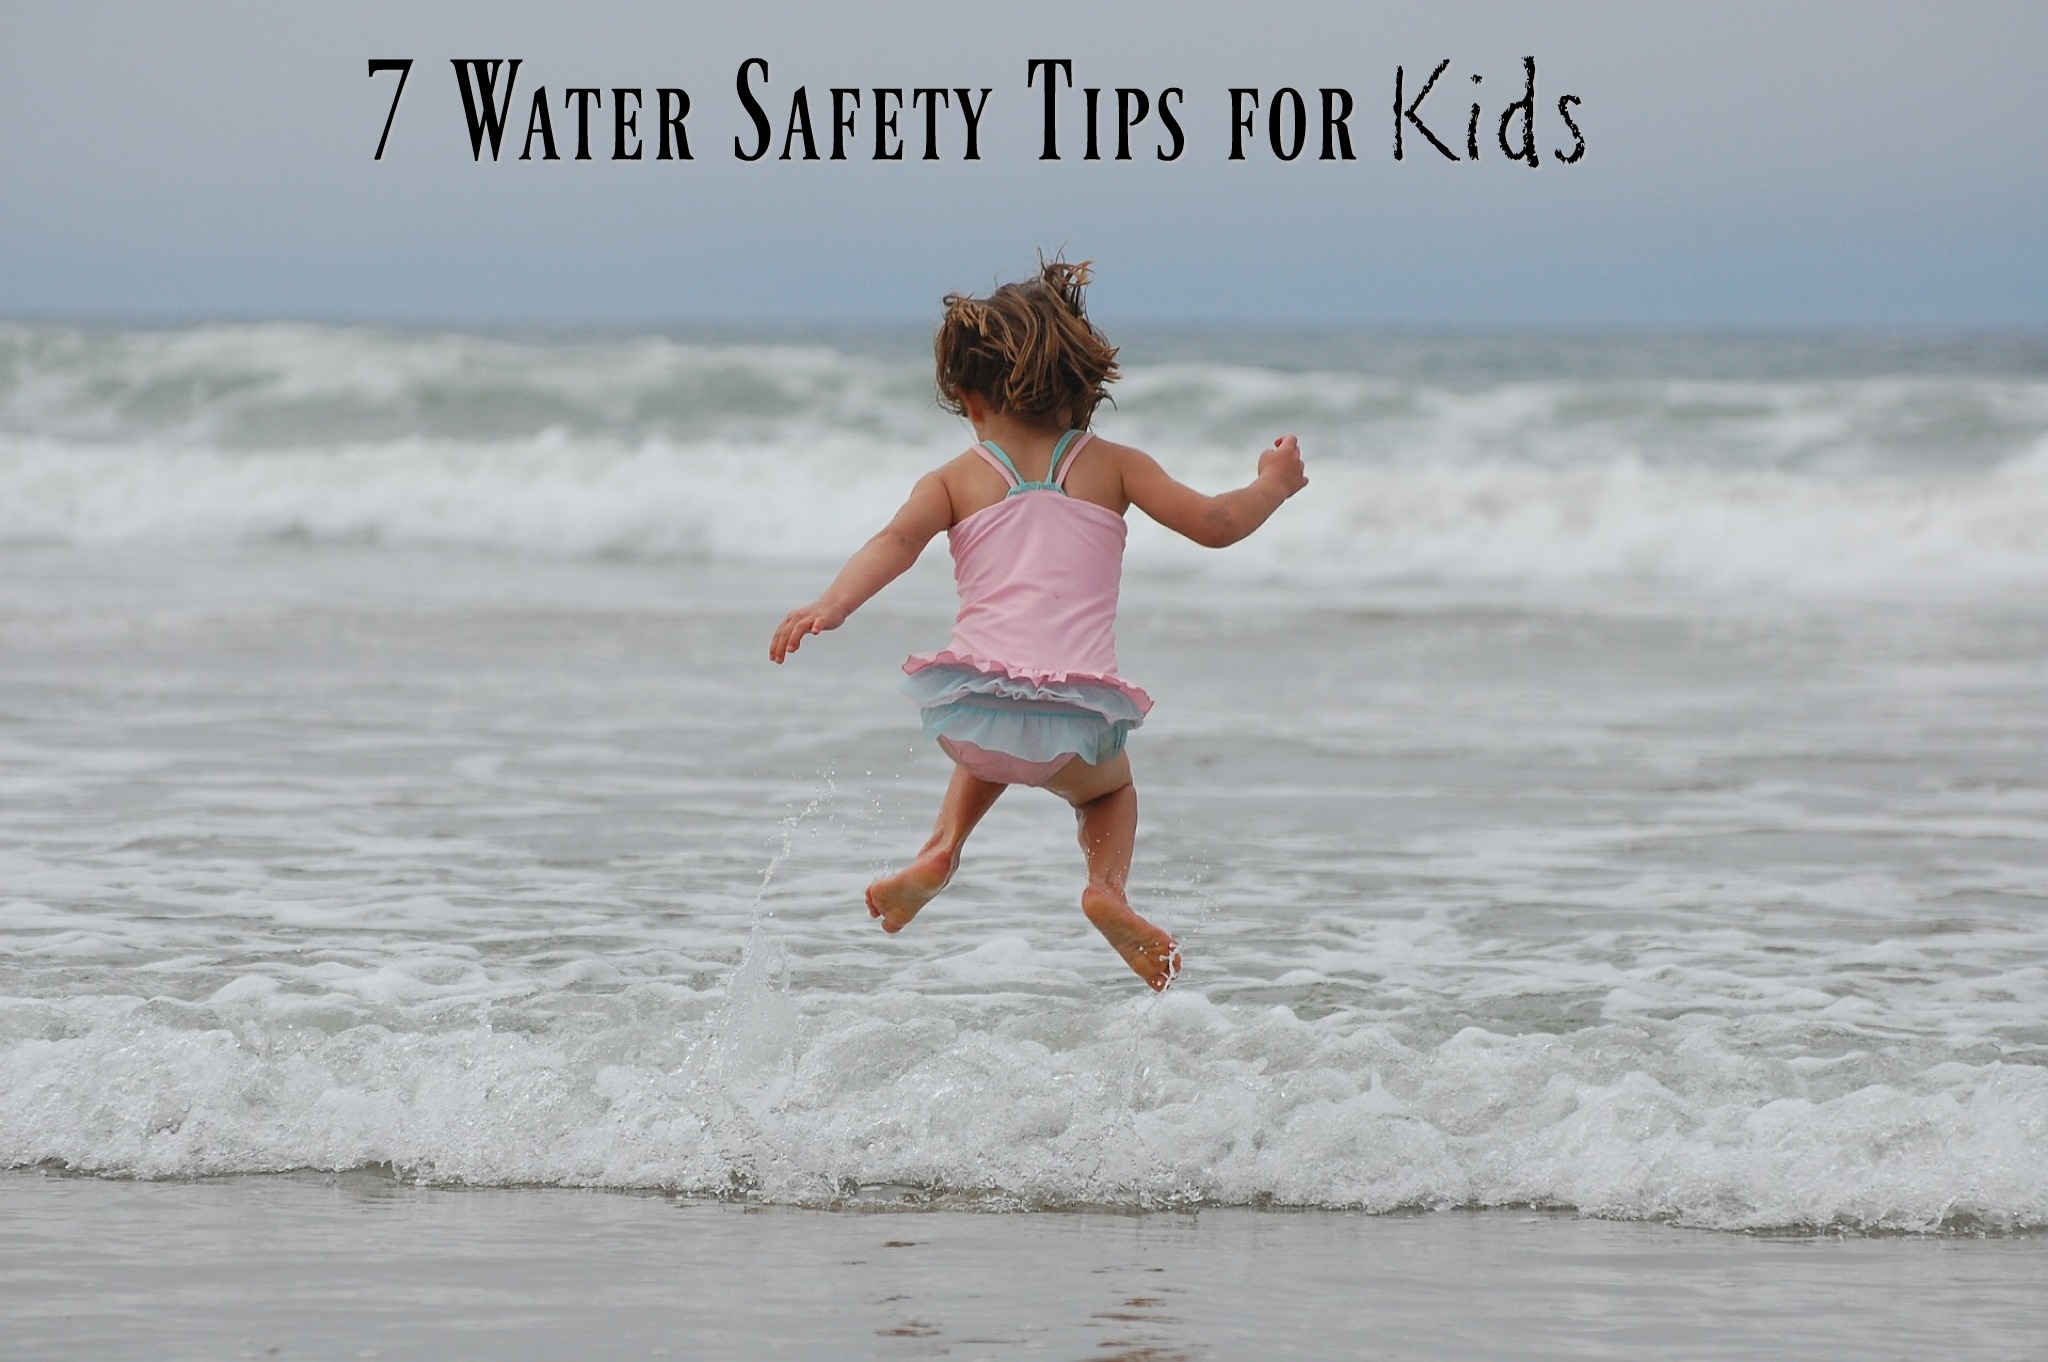 7 Water Safety Tips for Kids